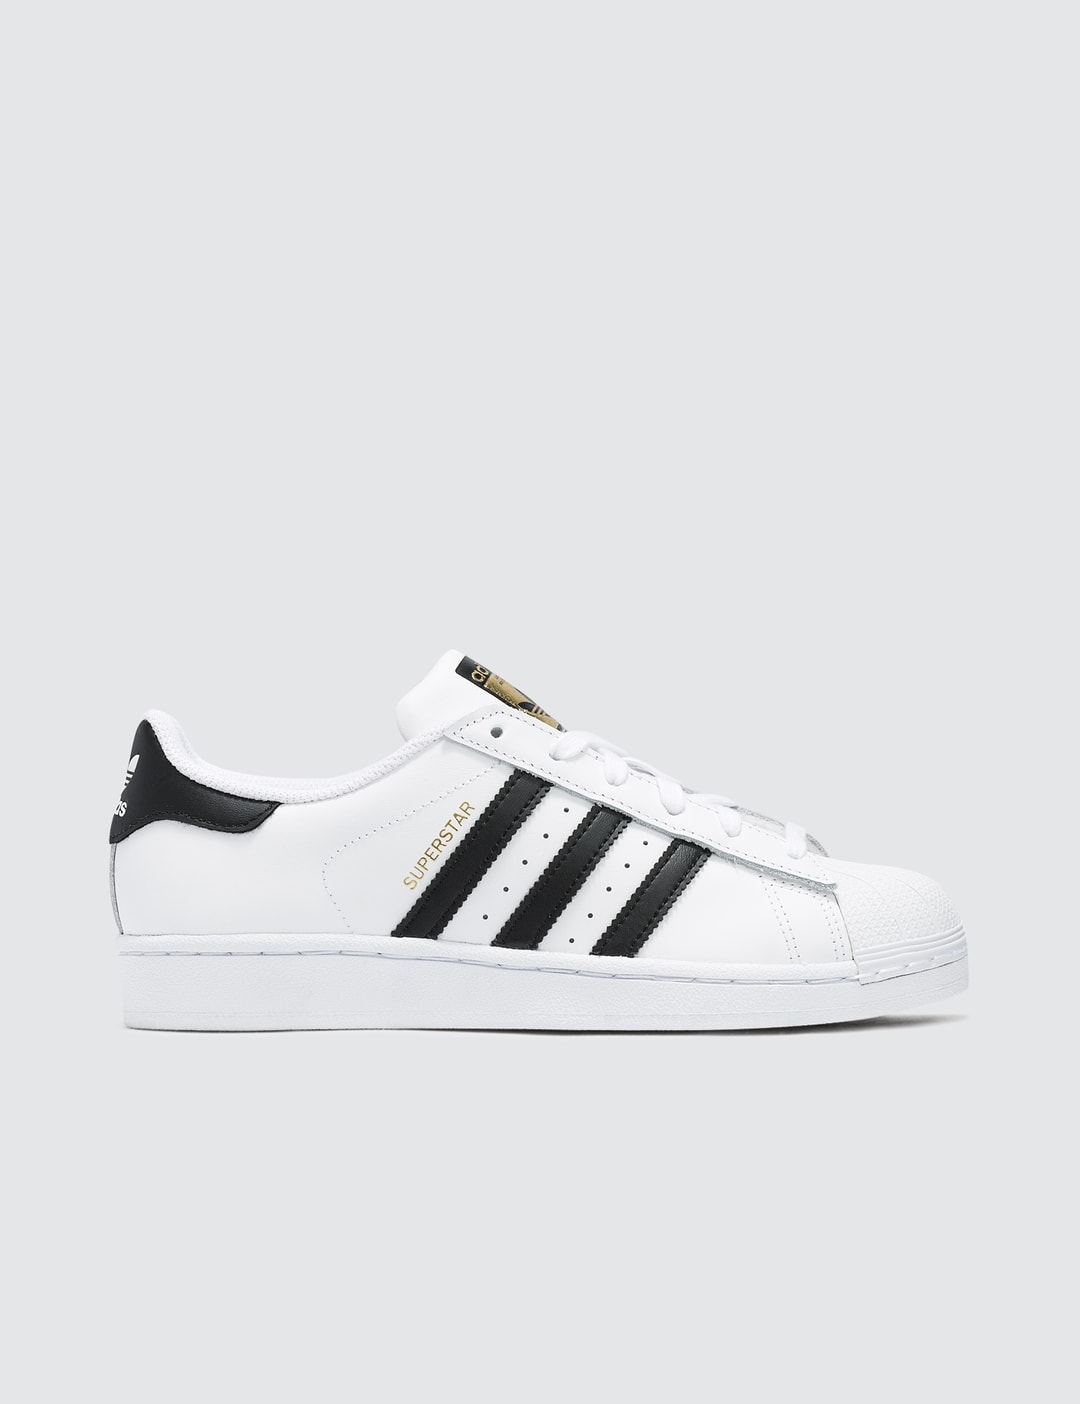 Adidas Originals - Superstar | HBX - Globally Curated Fashion and ...